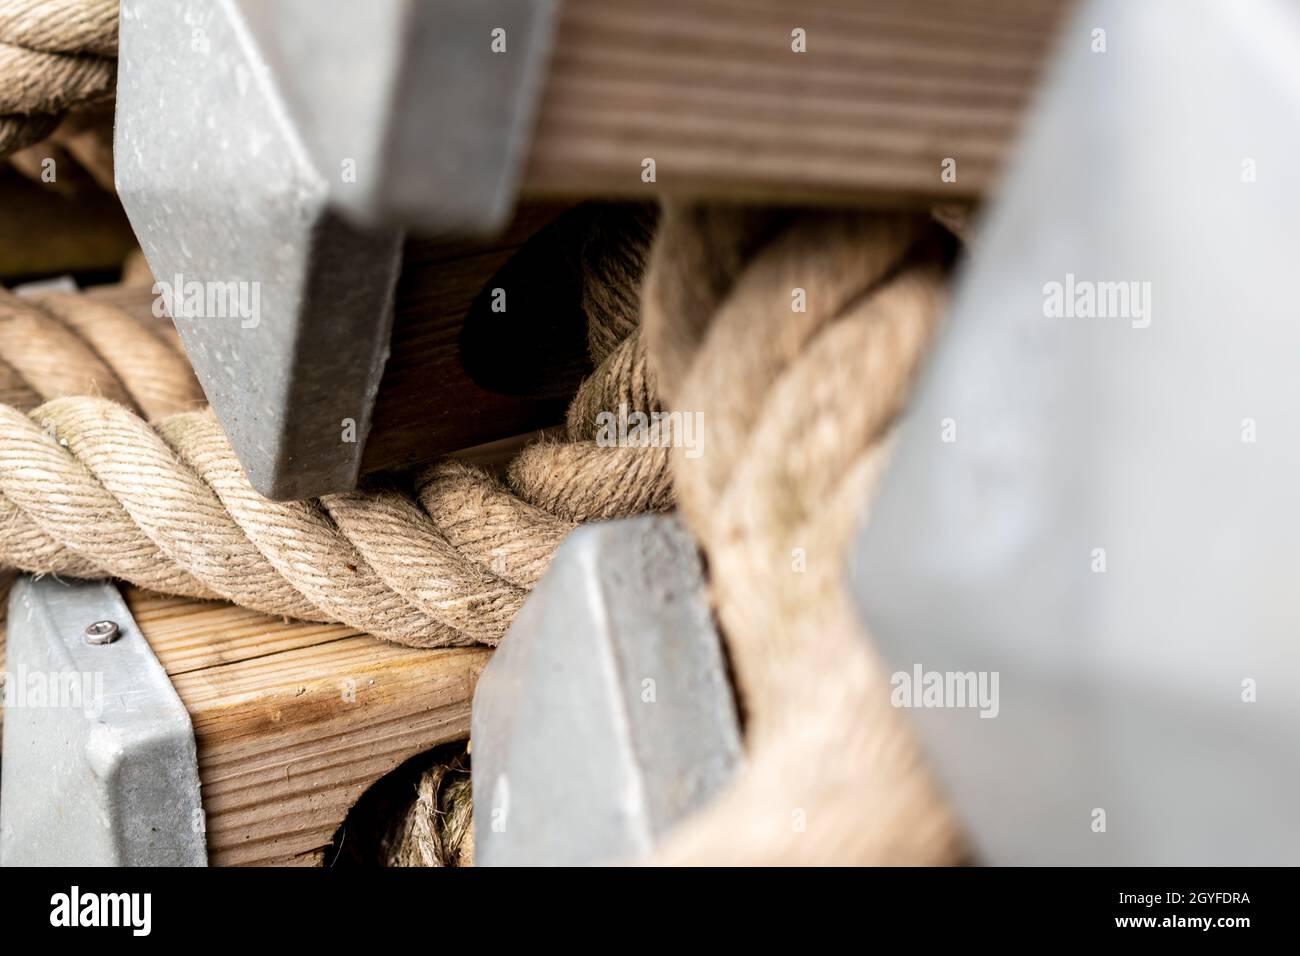 A tight and closeup shot of some rough ropes packed together. Stock Photo